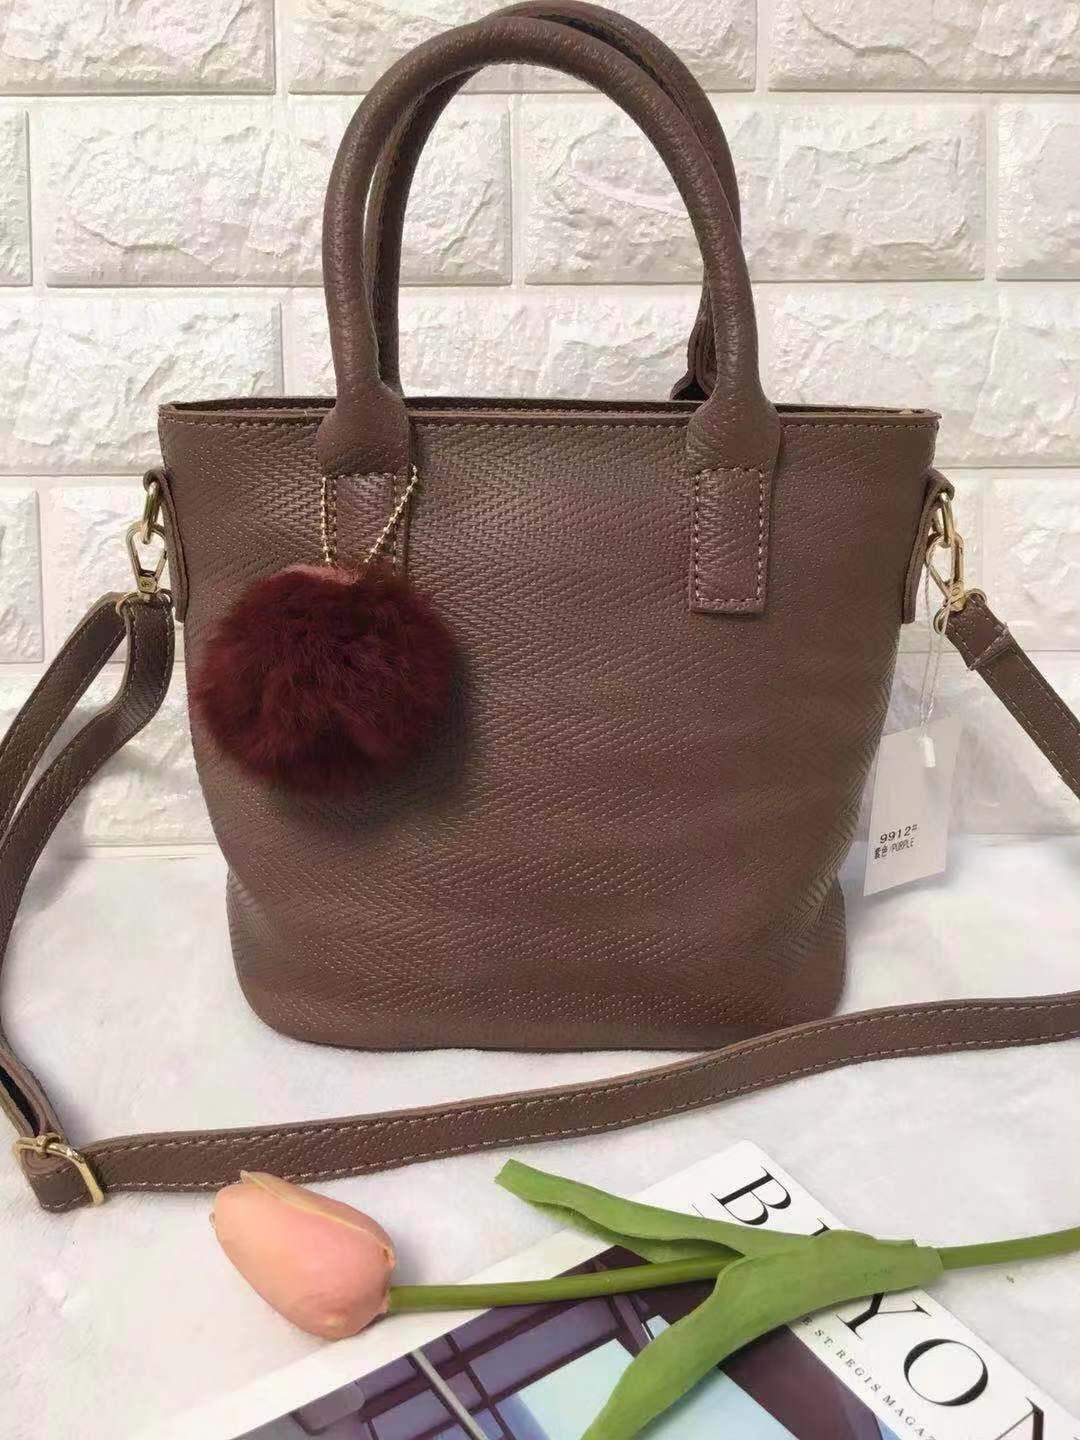 Bags for Women for sale - Womens Bags online brands, prices & reviews in Philippines | www.bagssaleusa.com